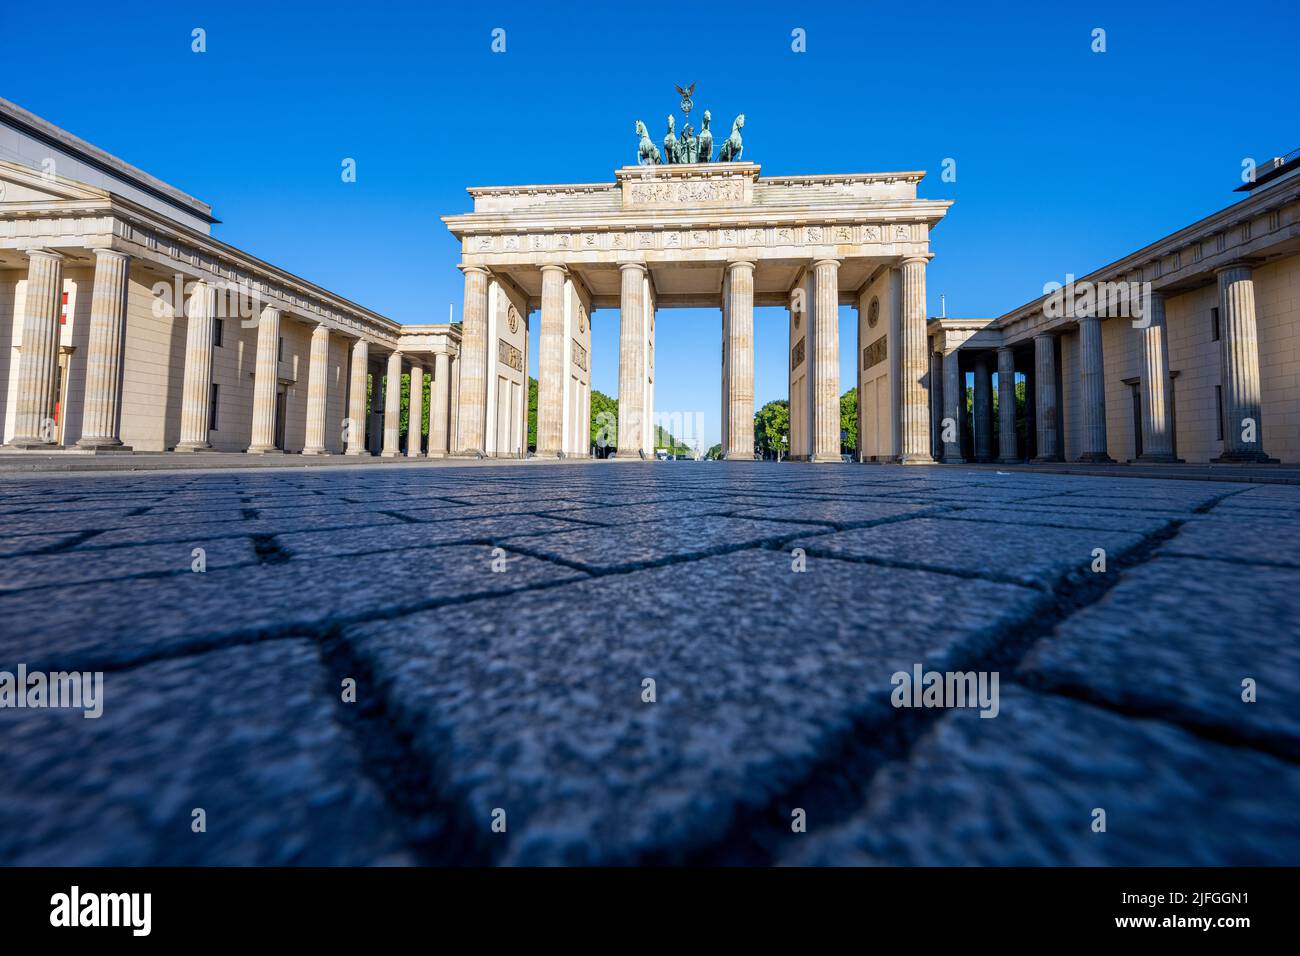 Low angle view of the famous Brandenburg Gate in Berlin Stock Photo